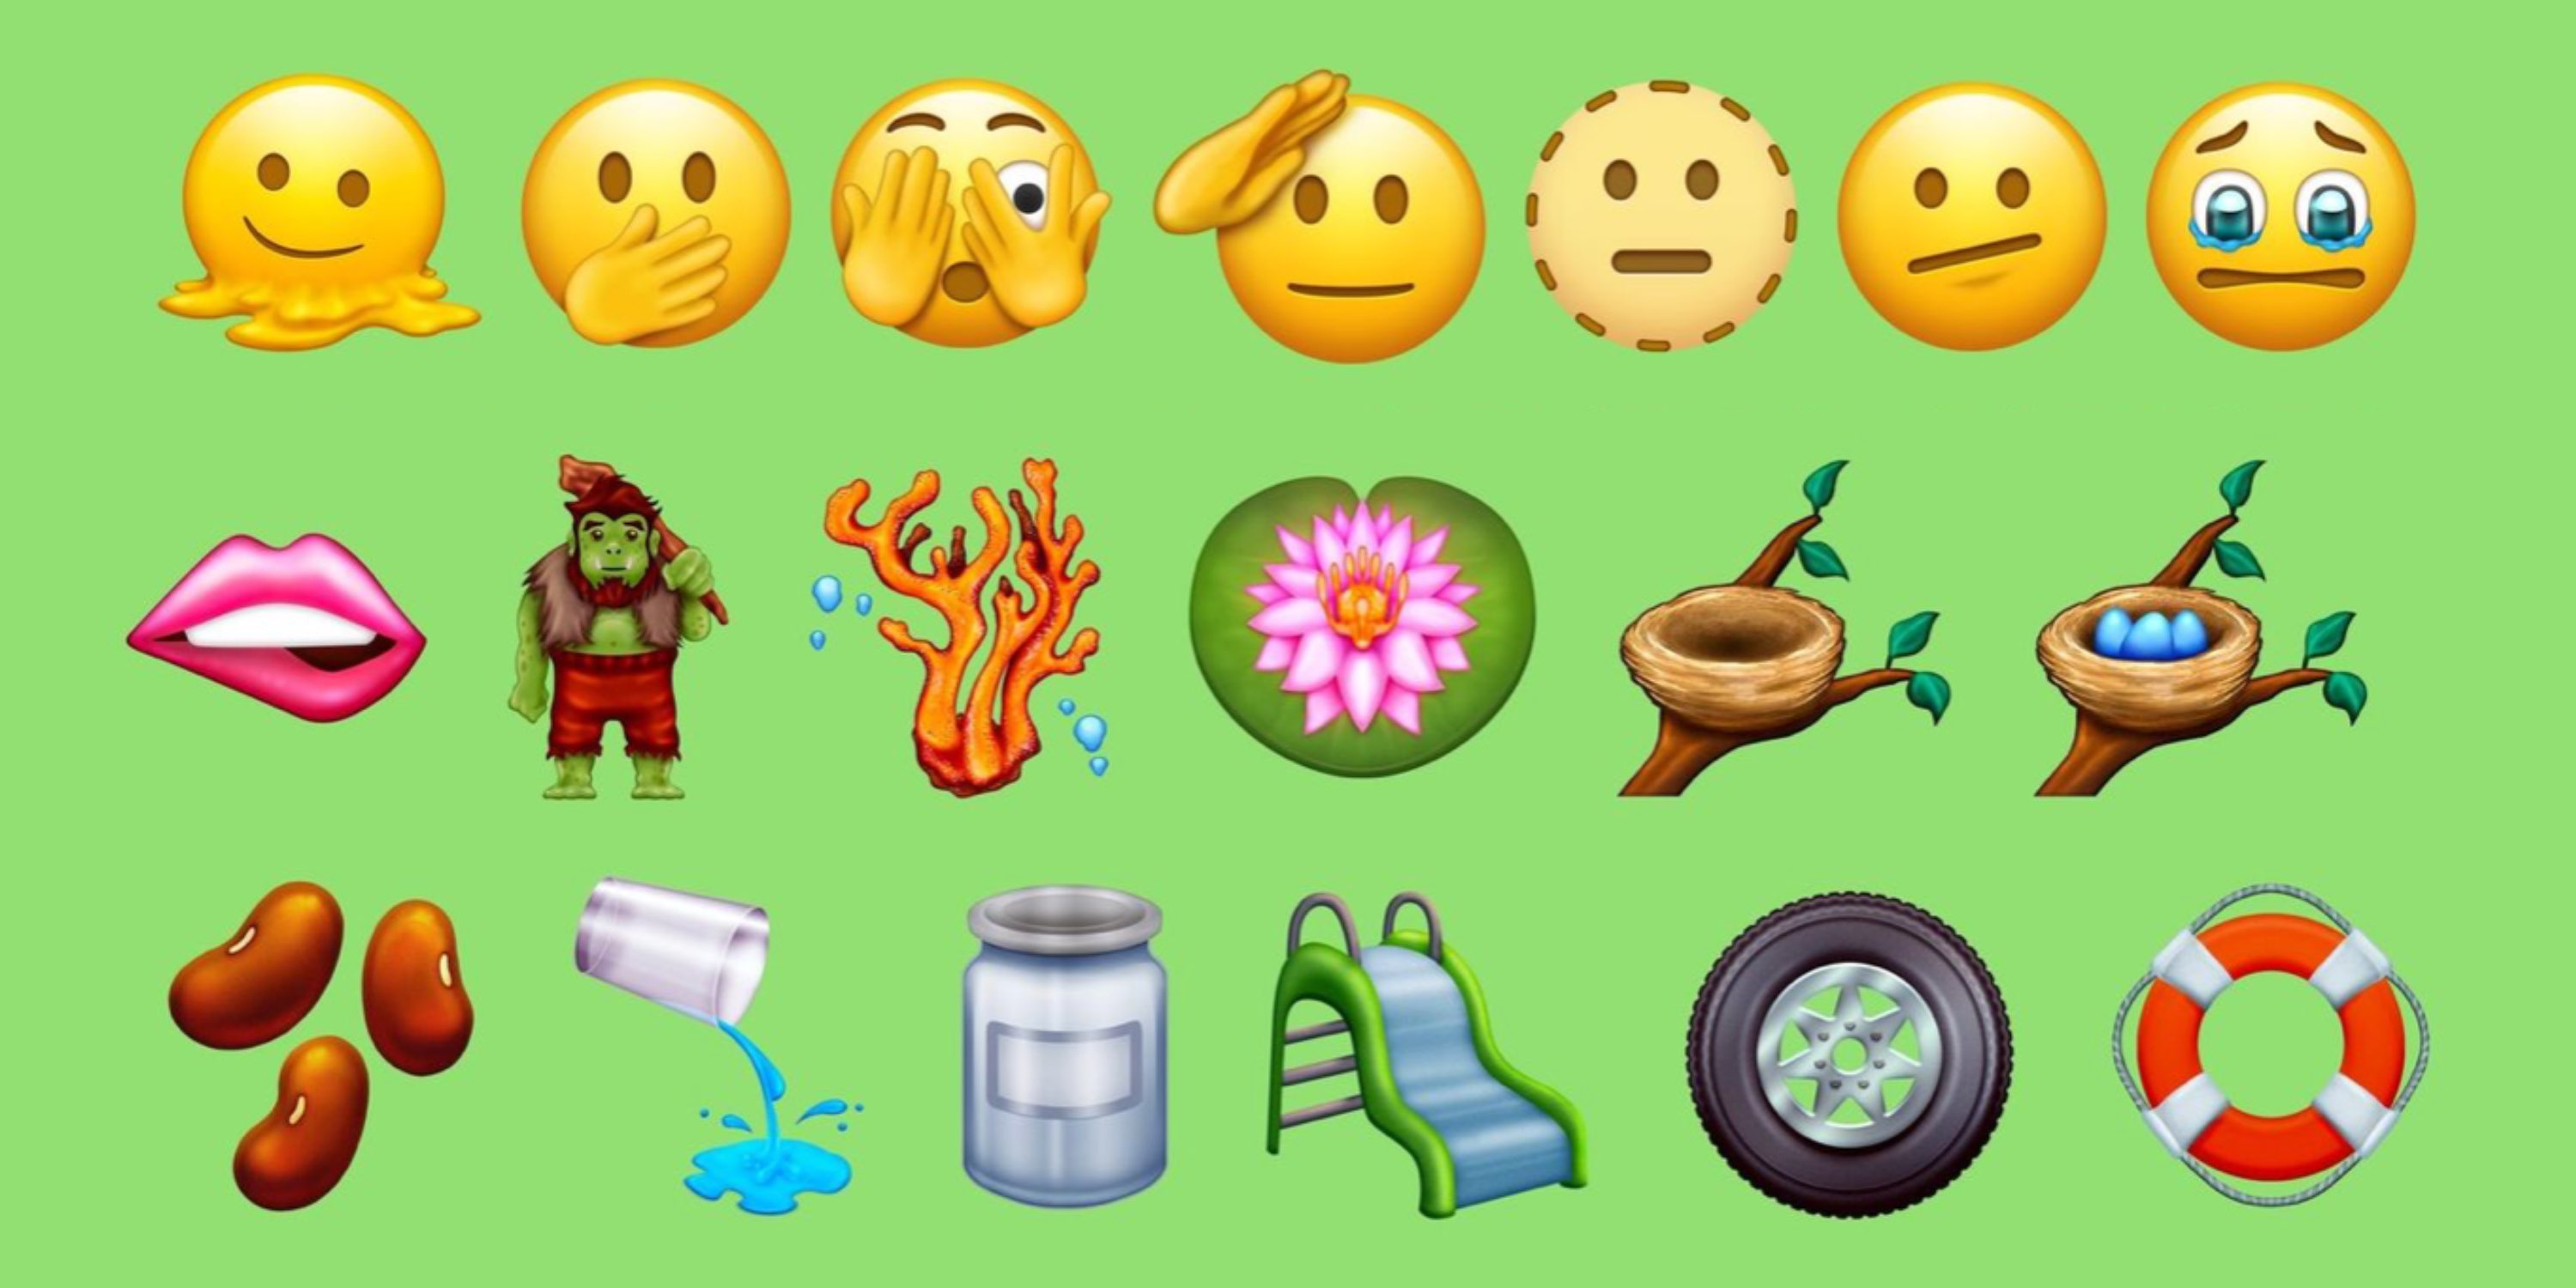 Here's a look at the new emoji that could come to iPhone this year [Update:  Emoji 14.0 finalized] - 9to5Mac